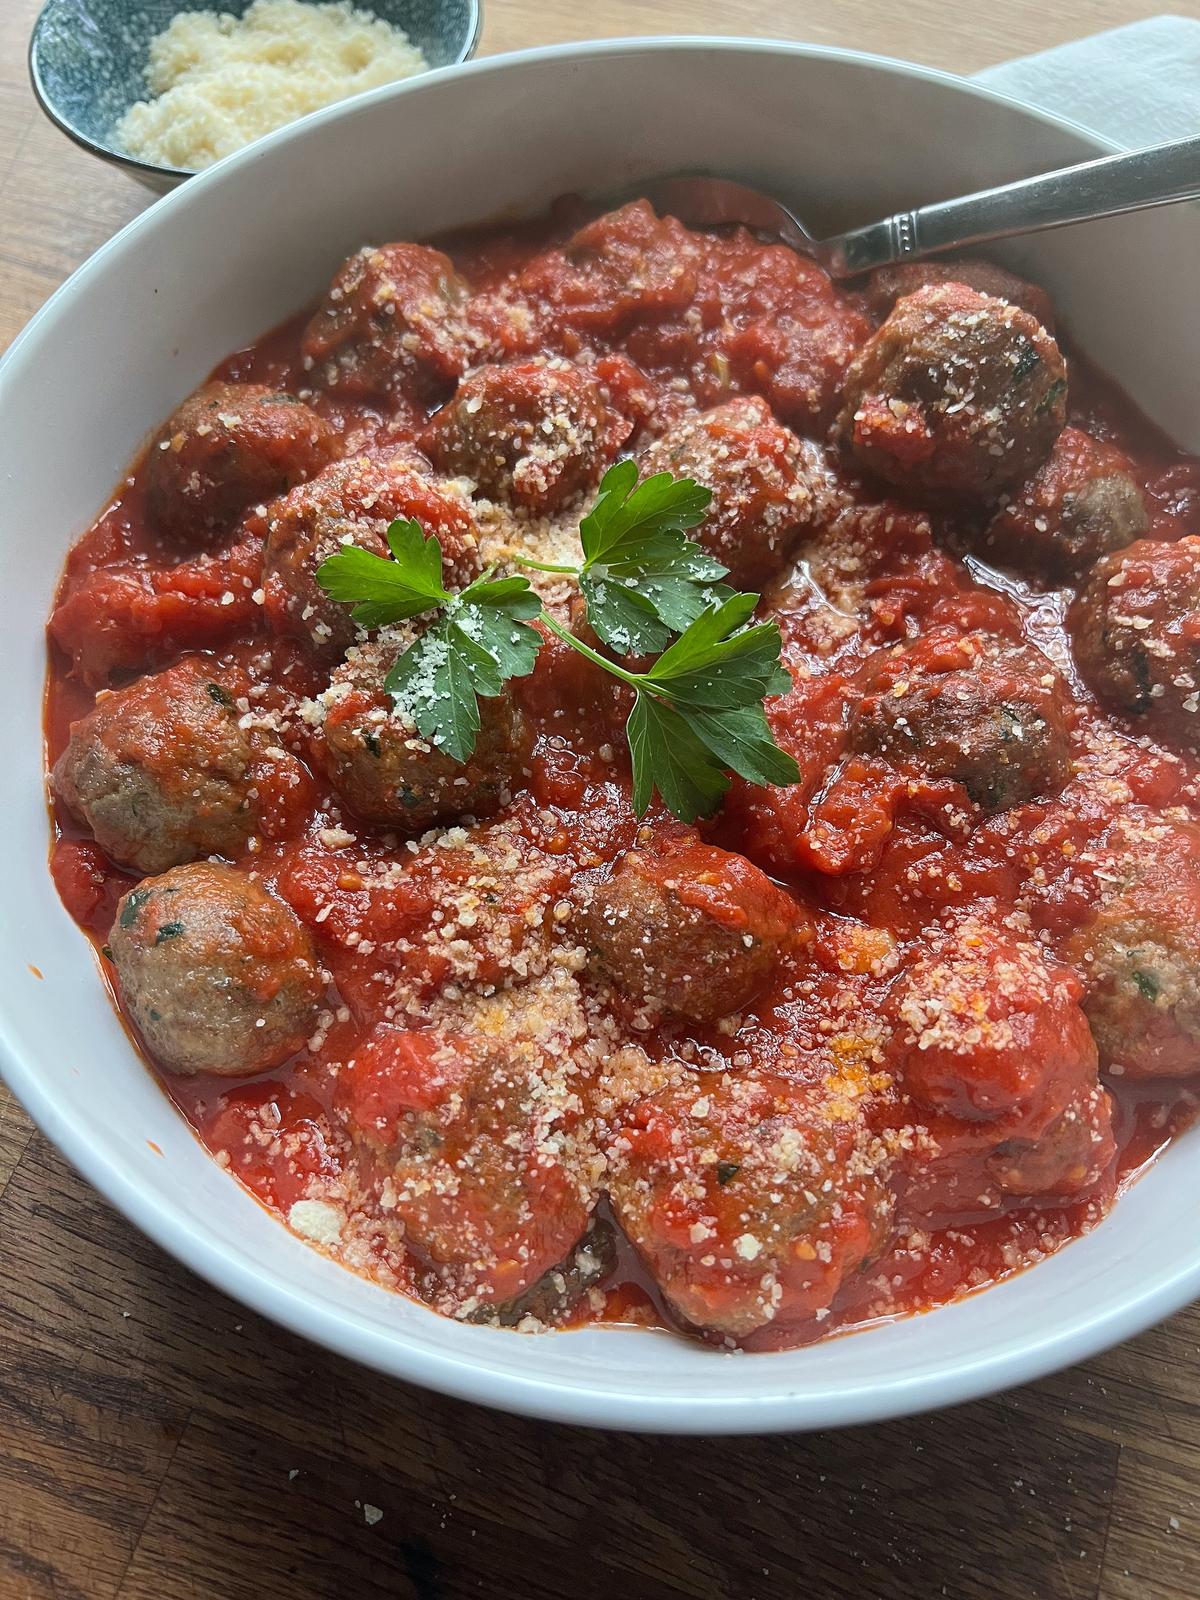 Rick Easton uses a 30 percent bread to meat ratio for meatballs in his and Melissa McCart's new cookbook, "Bread and How to Eat It." (Gretchen McKay/Pittsburgh Post-Gazette/TNS)